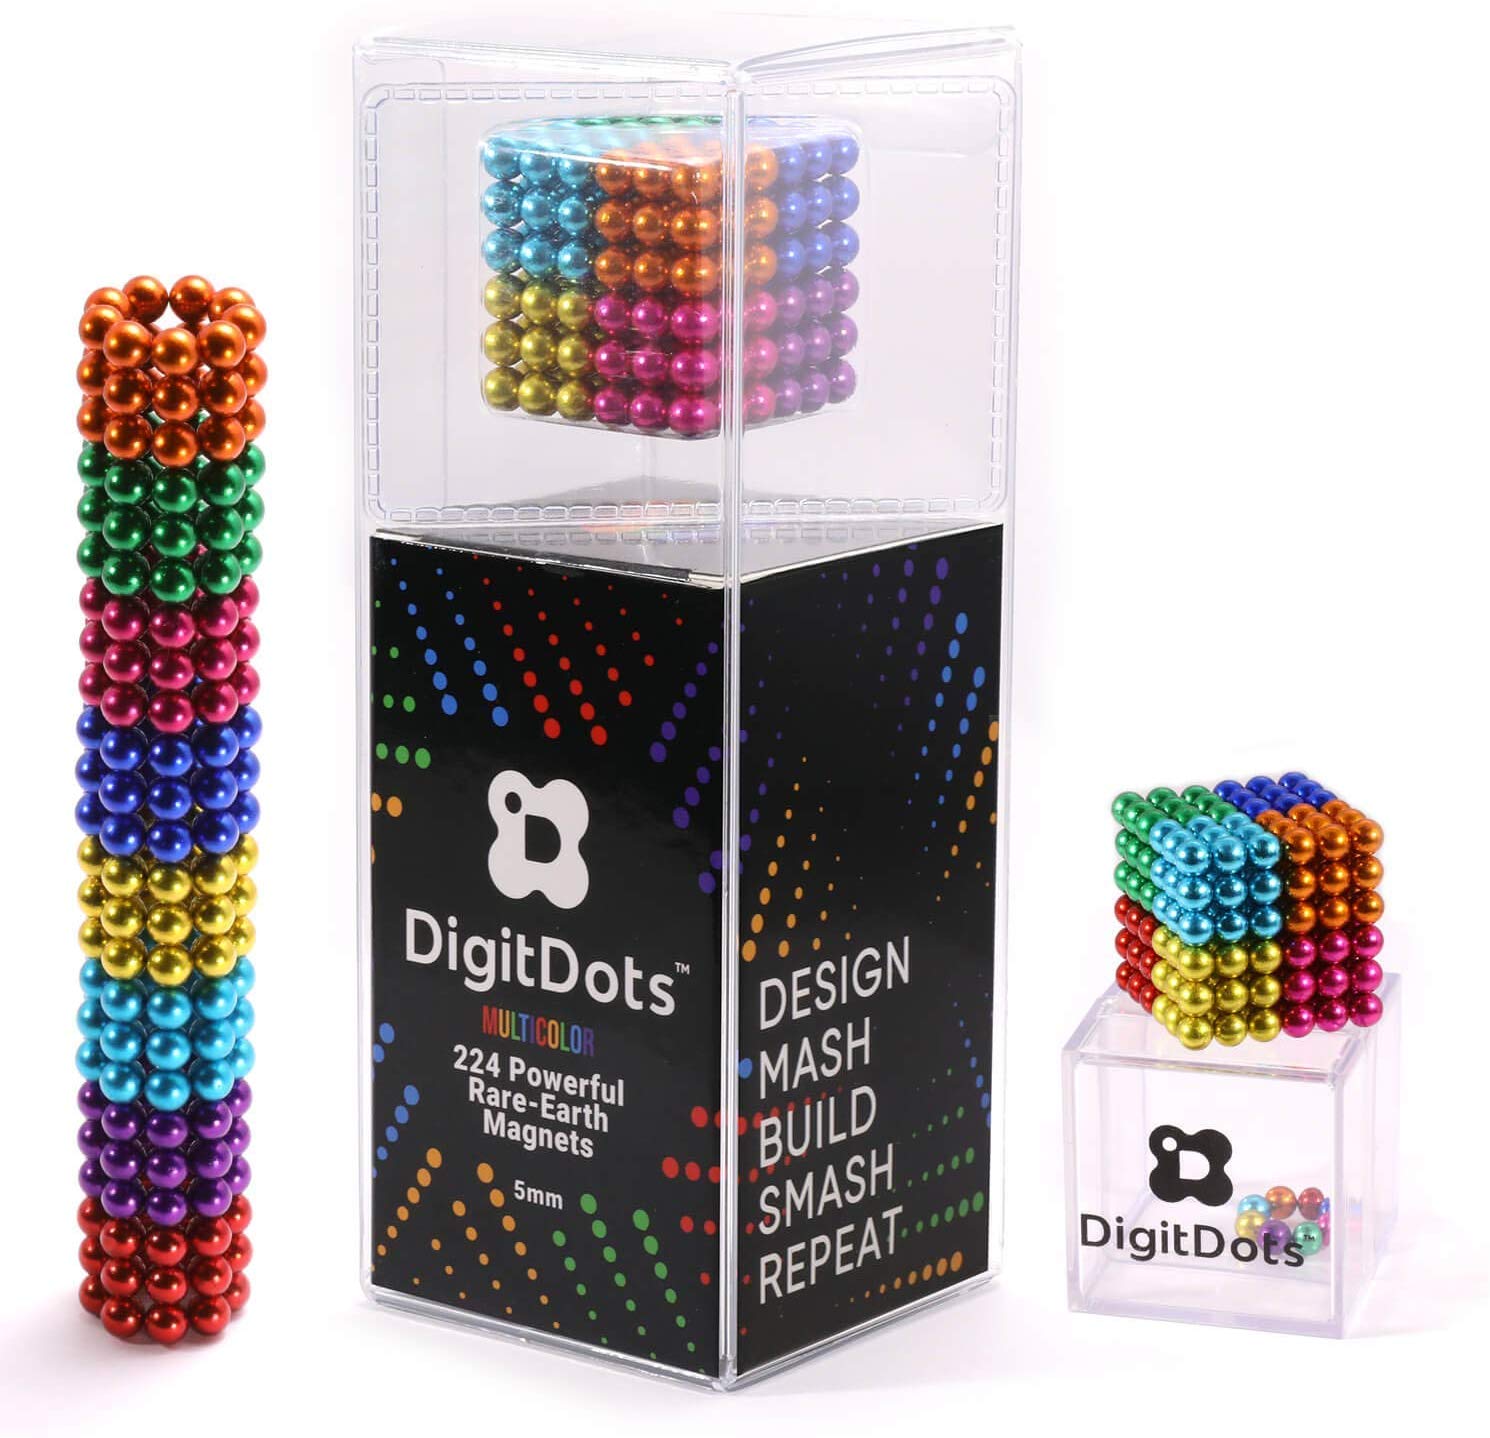 magnetic beads toy